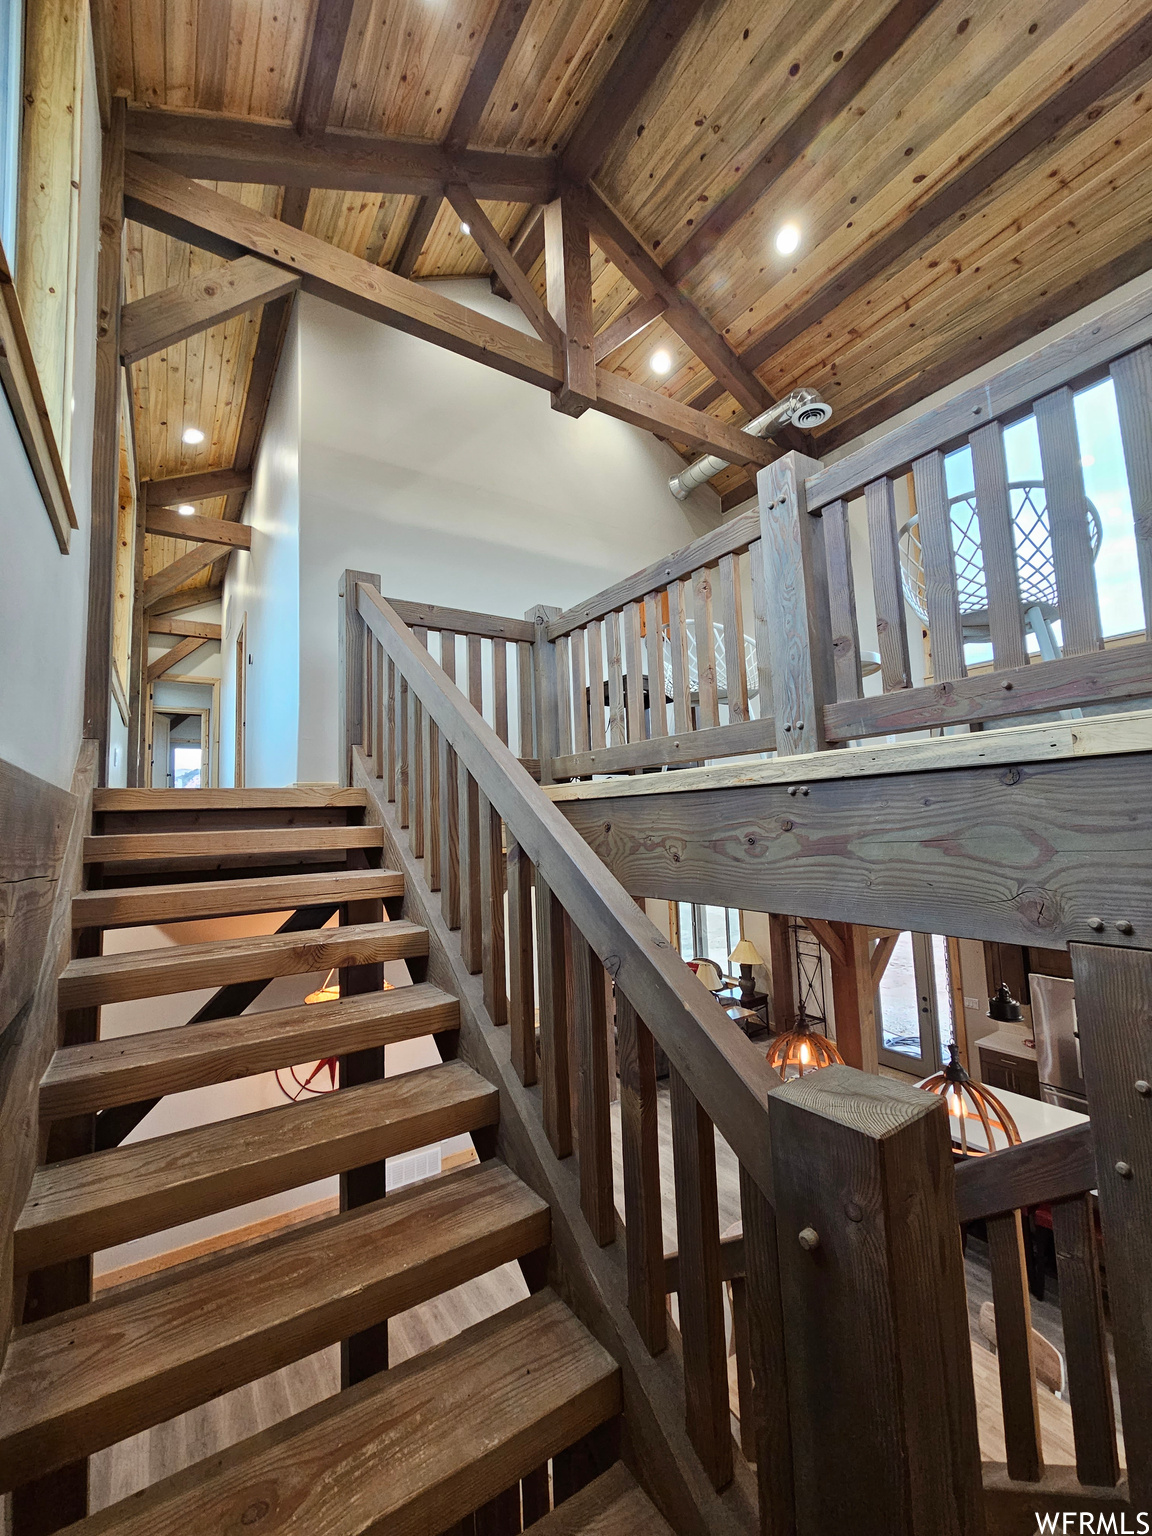 Stairway featuring a wealth of natural light, wood ceiling and lofted ceiling with beams